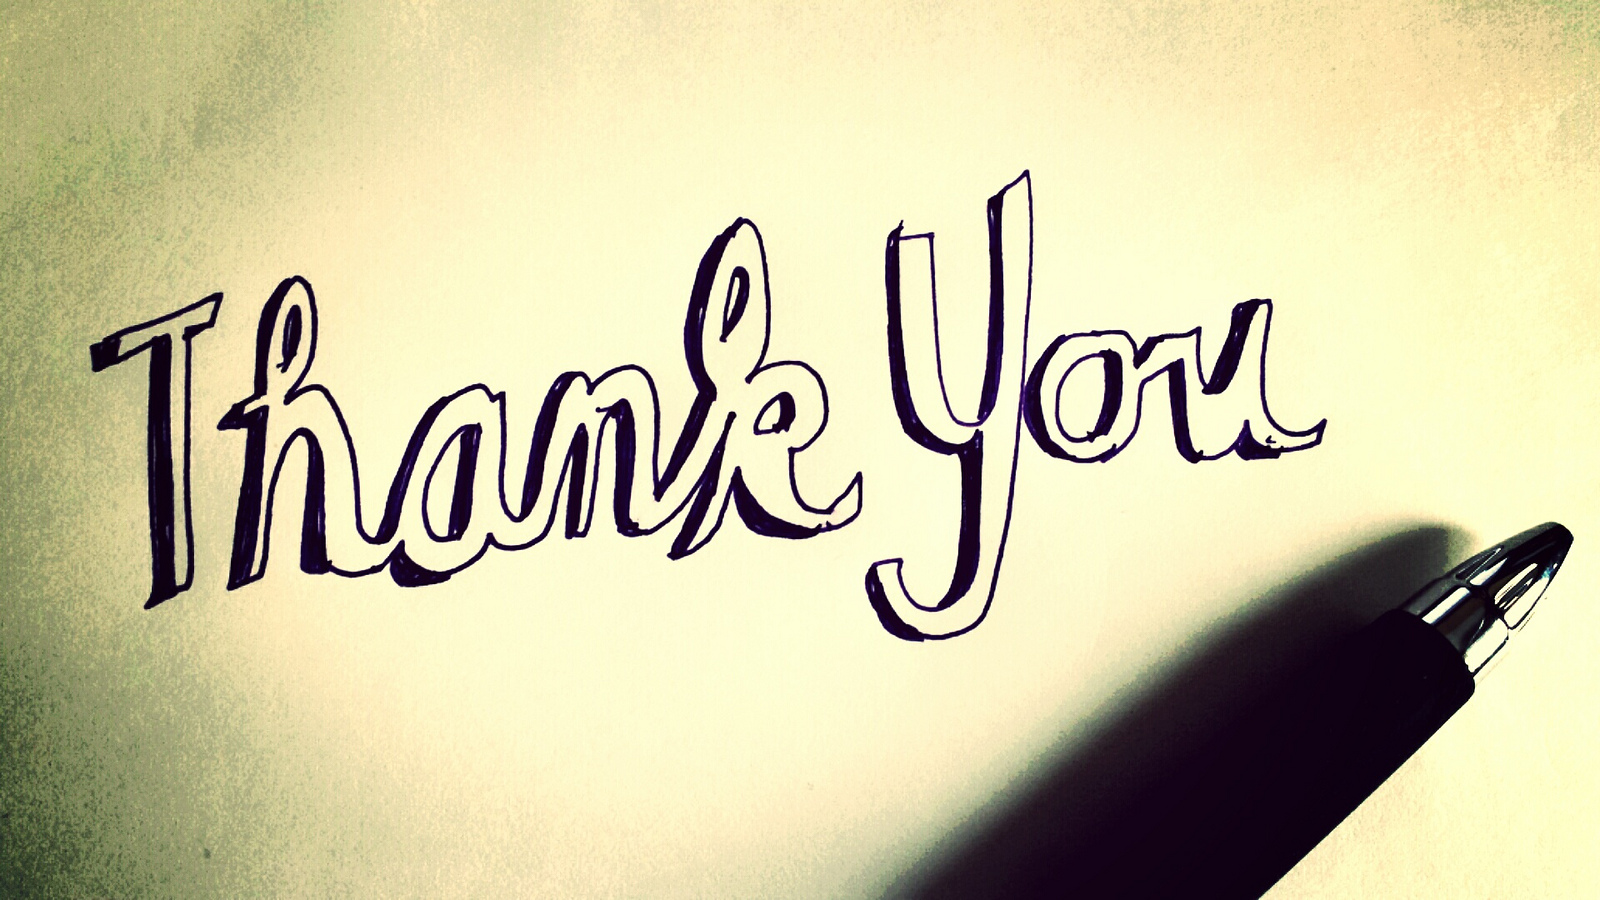 Free download latest HD Wallpaper under the Thank You category ...